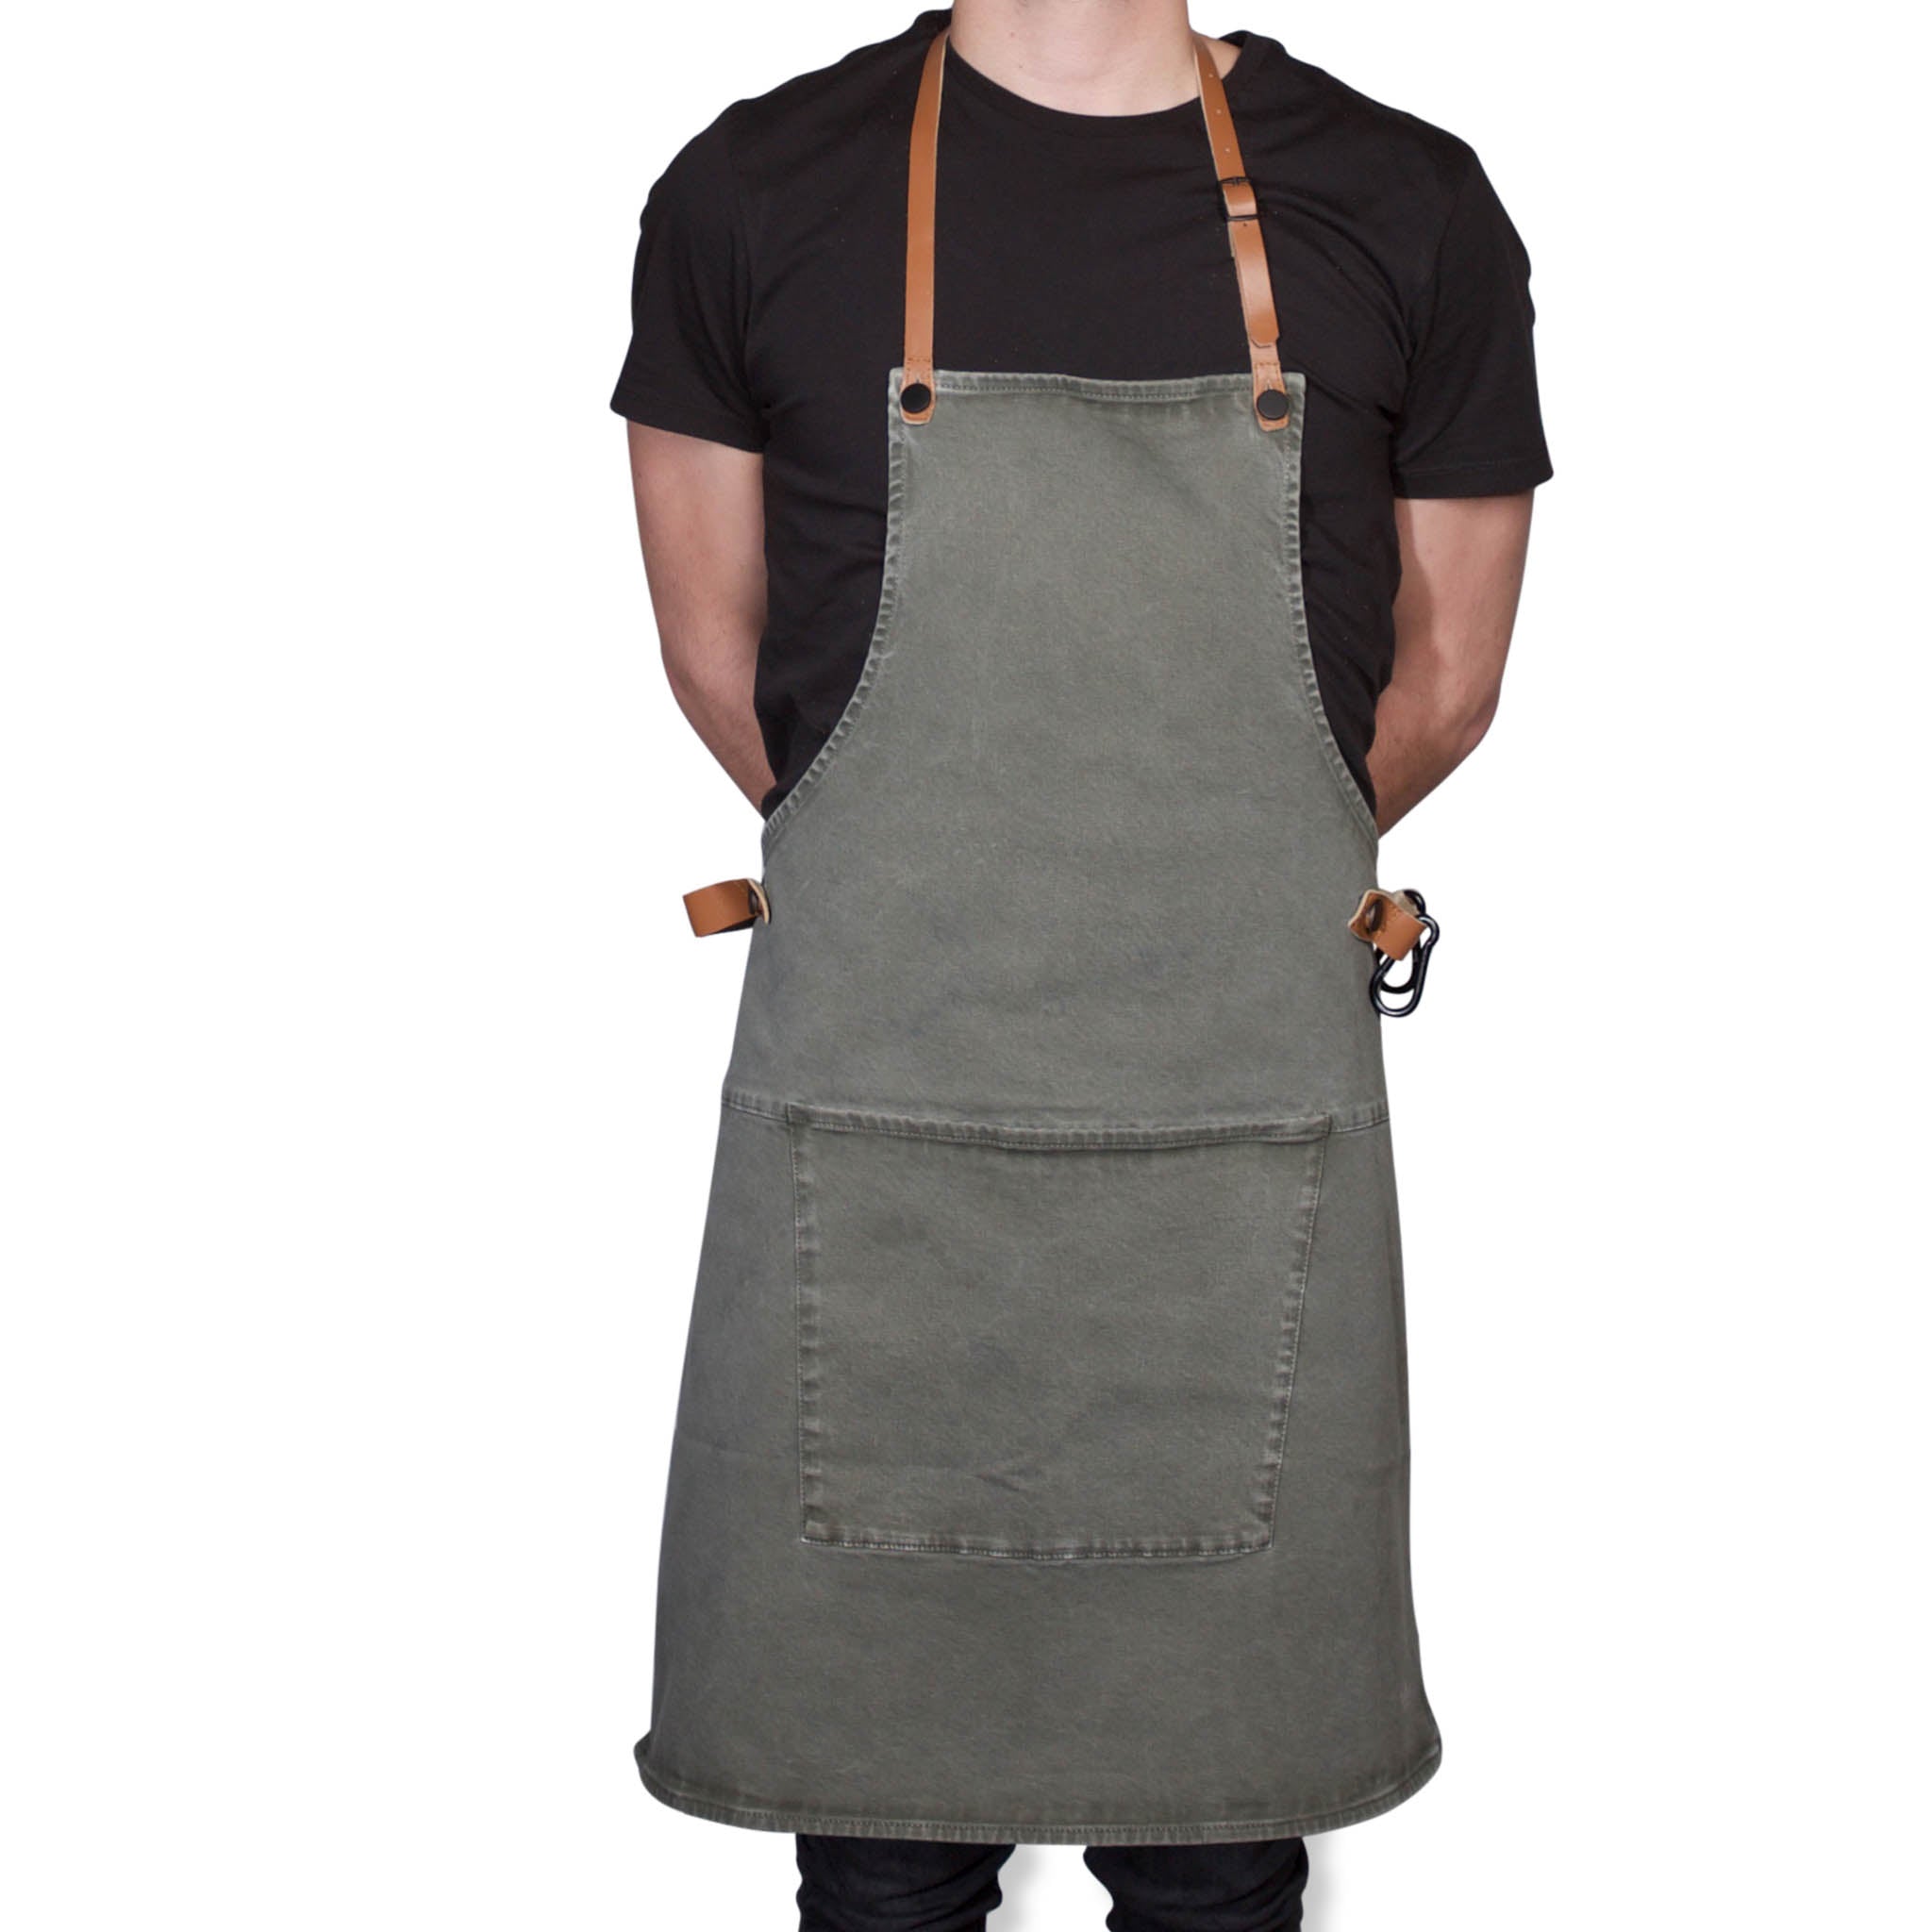 Dutchdeluxes Canvas BBQ Apron in Grey-Green Cookware Kitchen Clothing Model